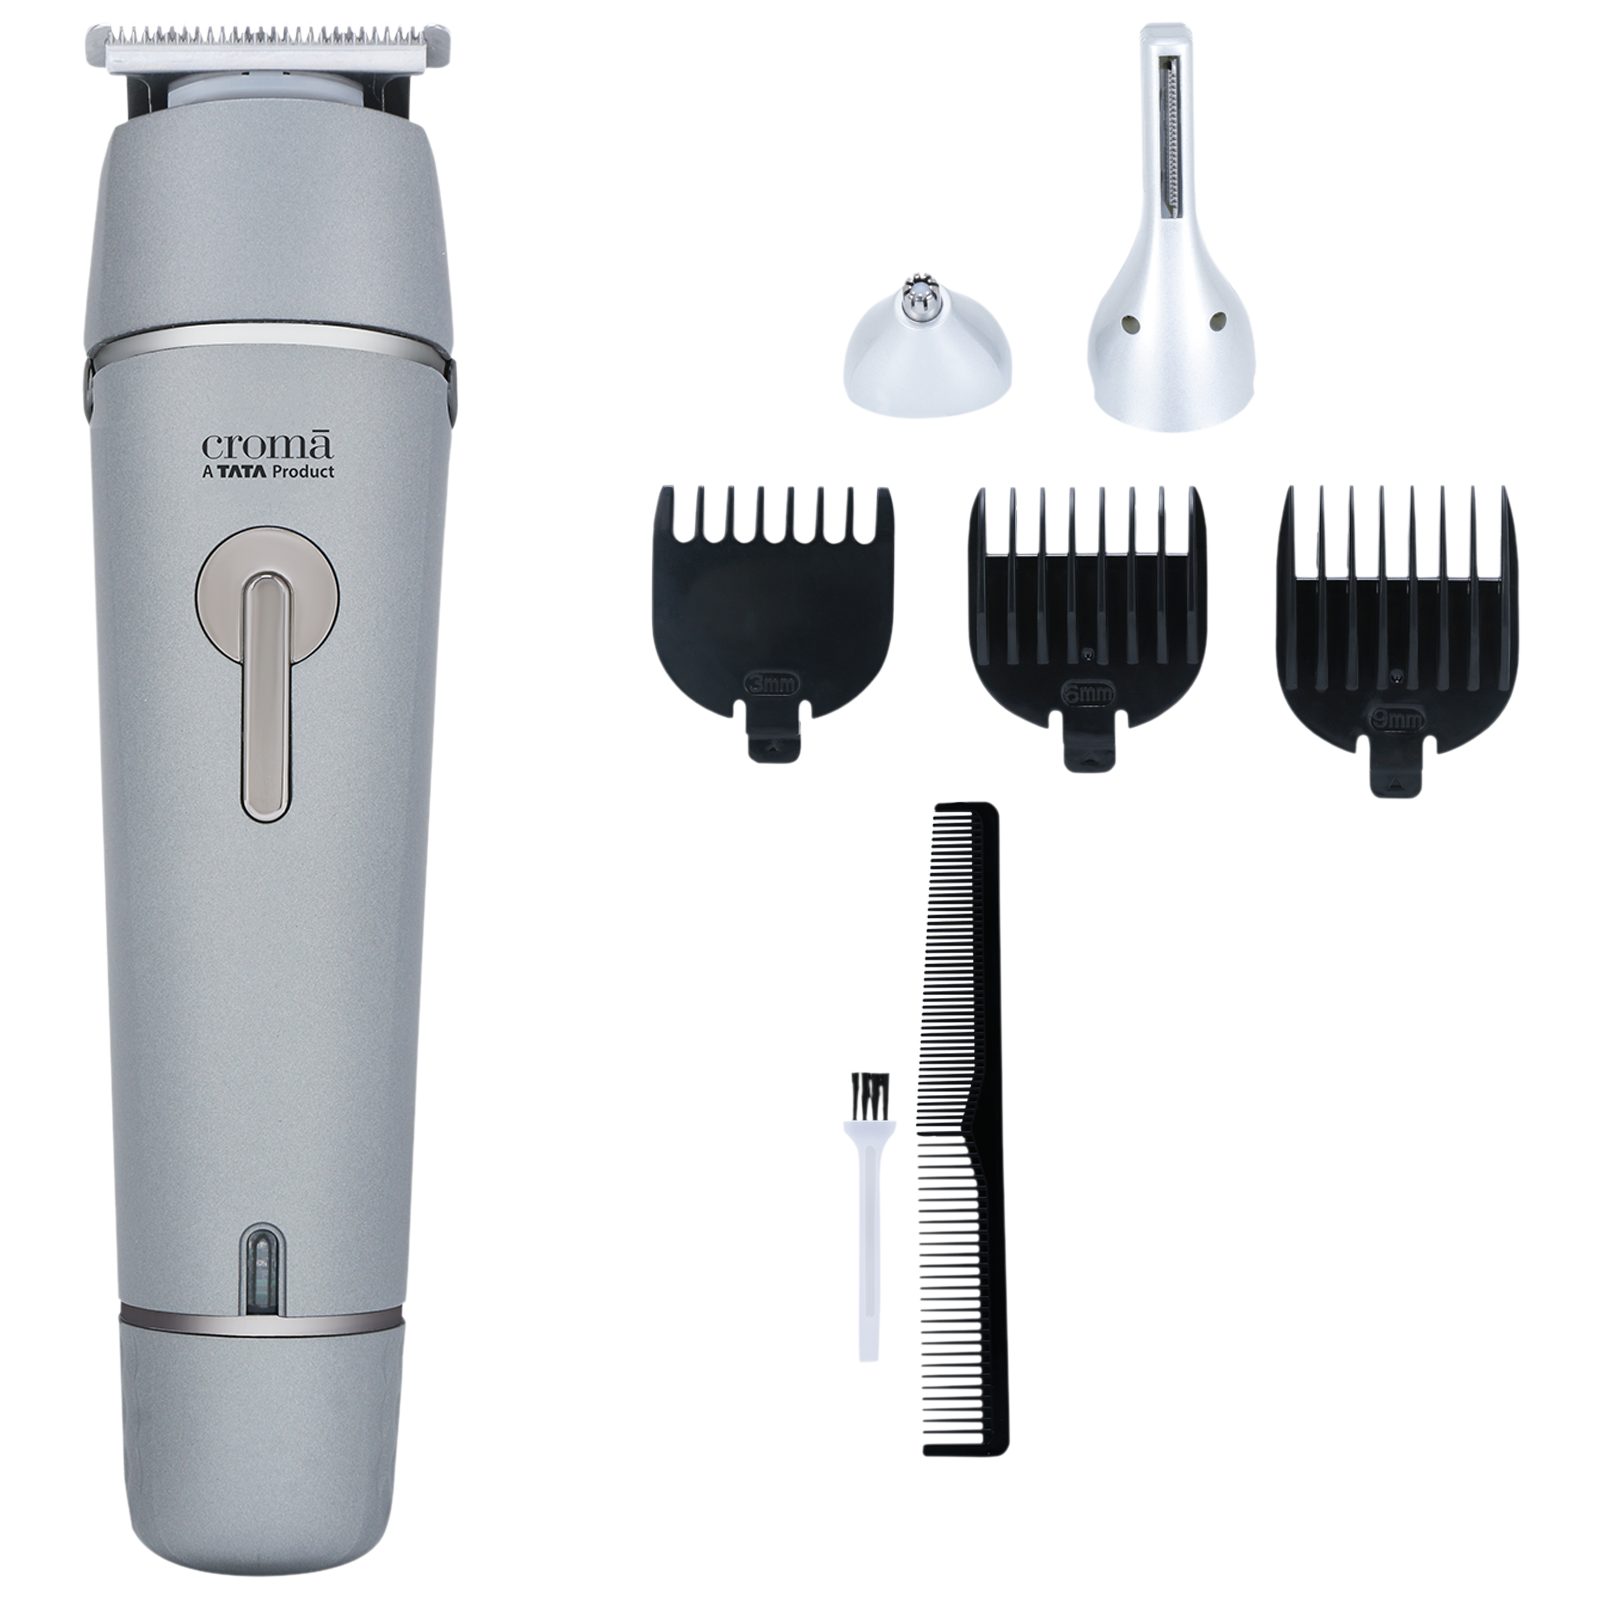 

Croma CRSHB07HCA023309 7-in-1 Rechargeable Cordless Grooming Kit for Face for Men (90mins Runtime, Self Sharpening Technology, Grey)